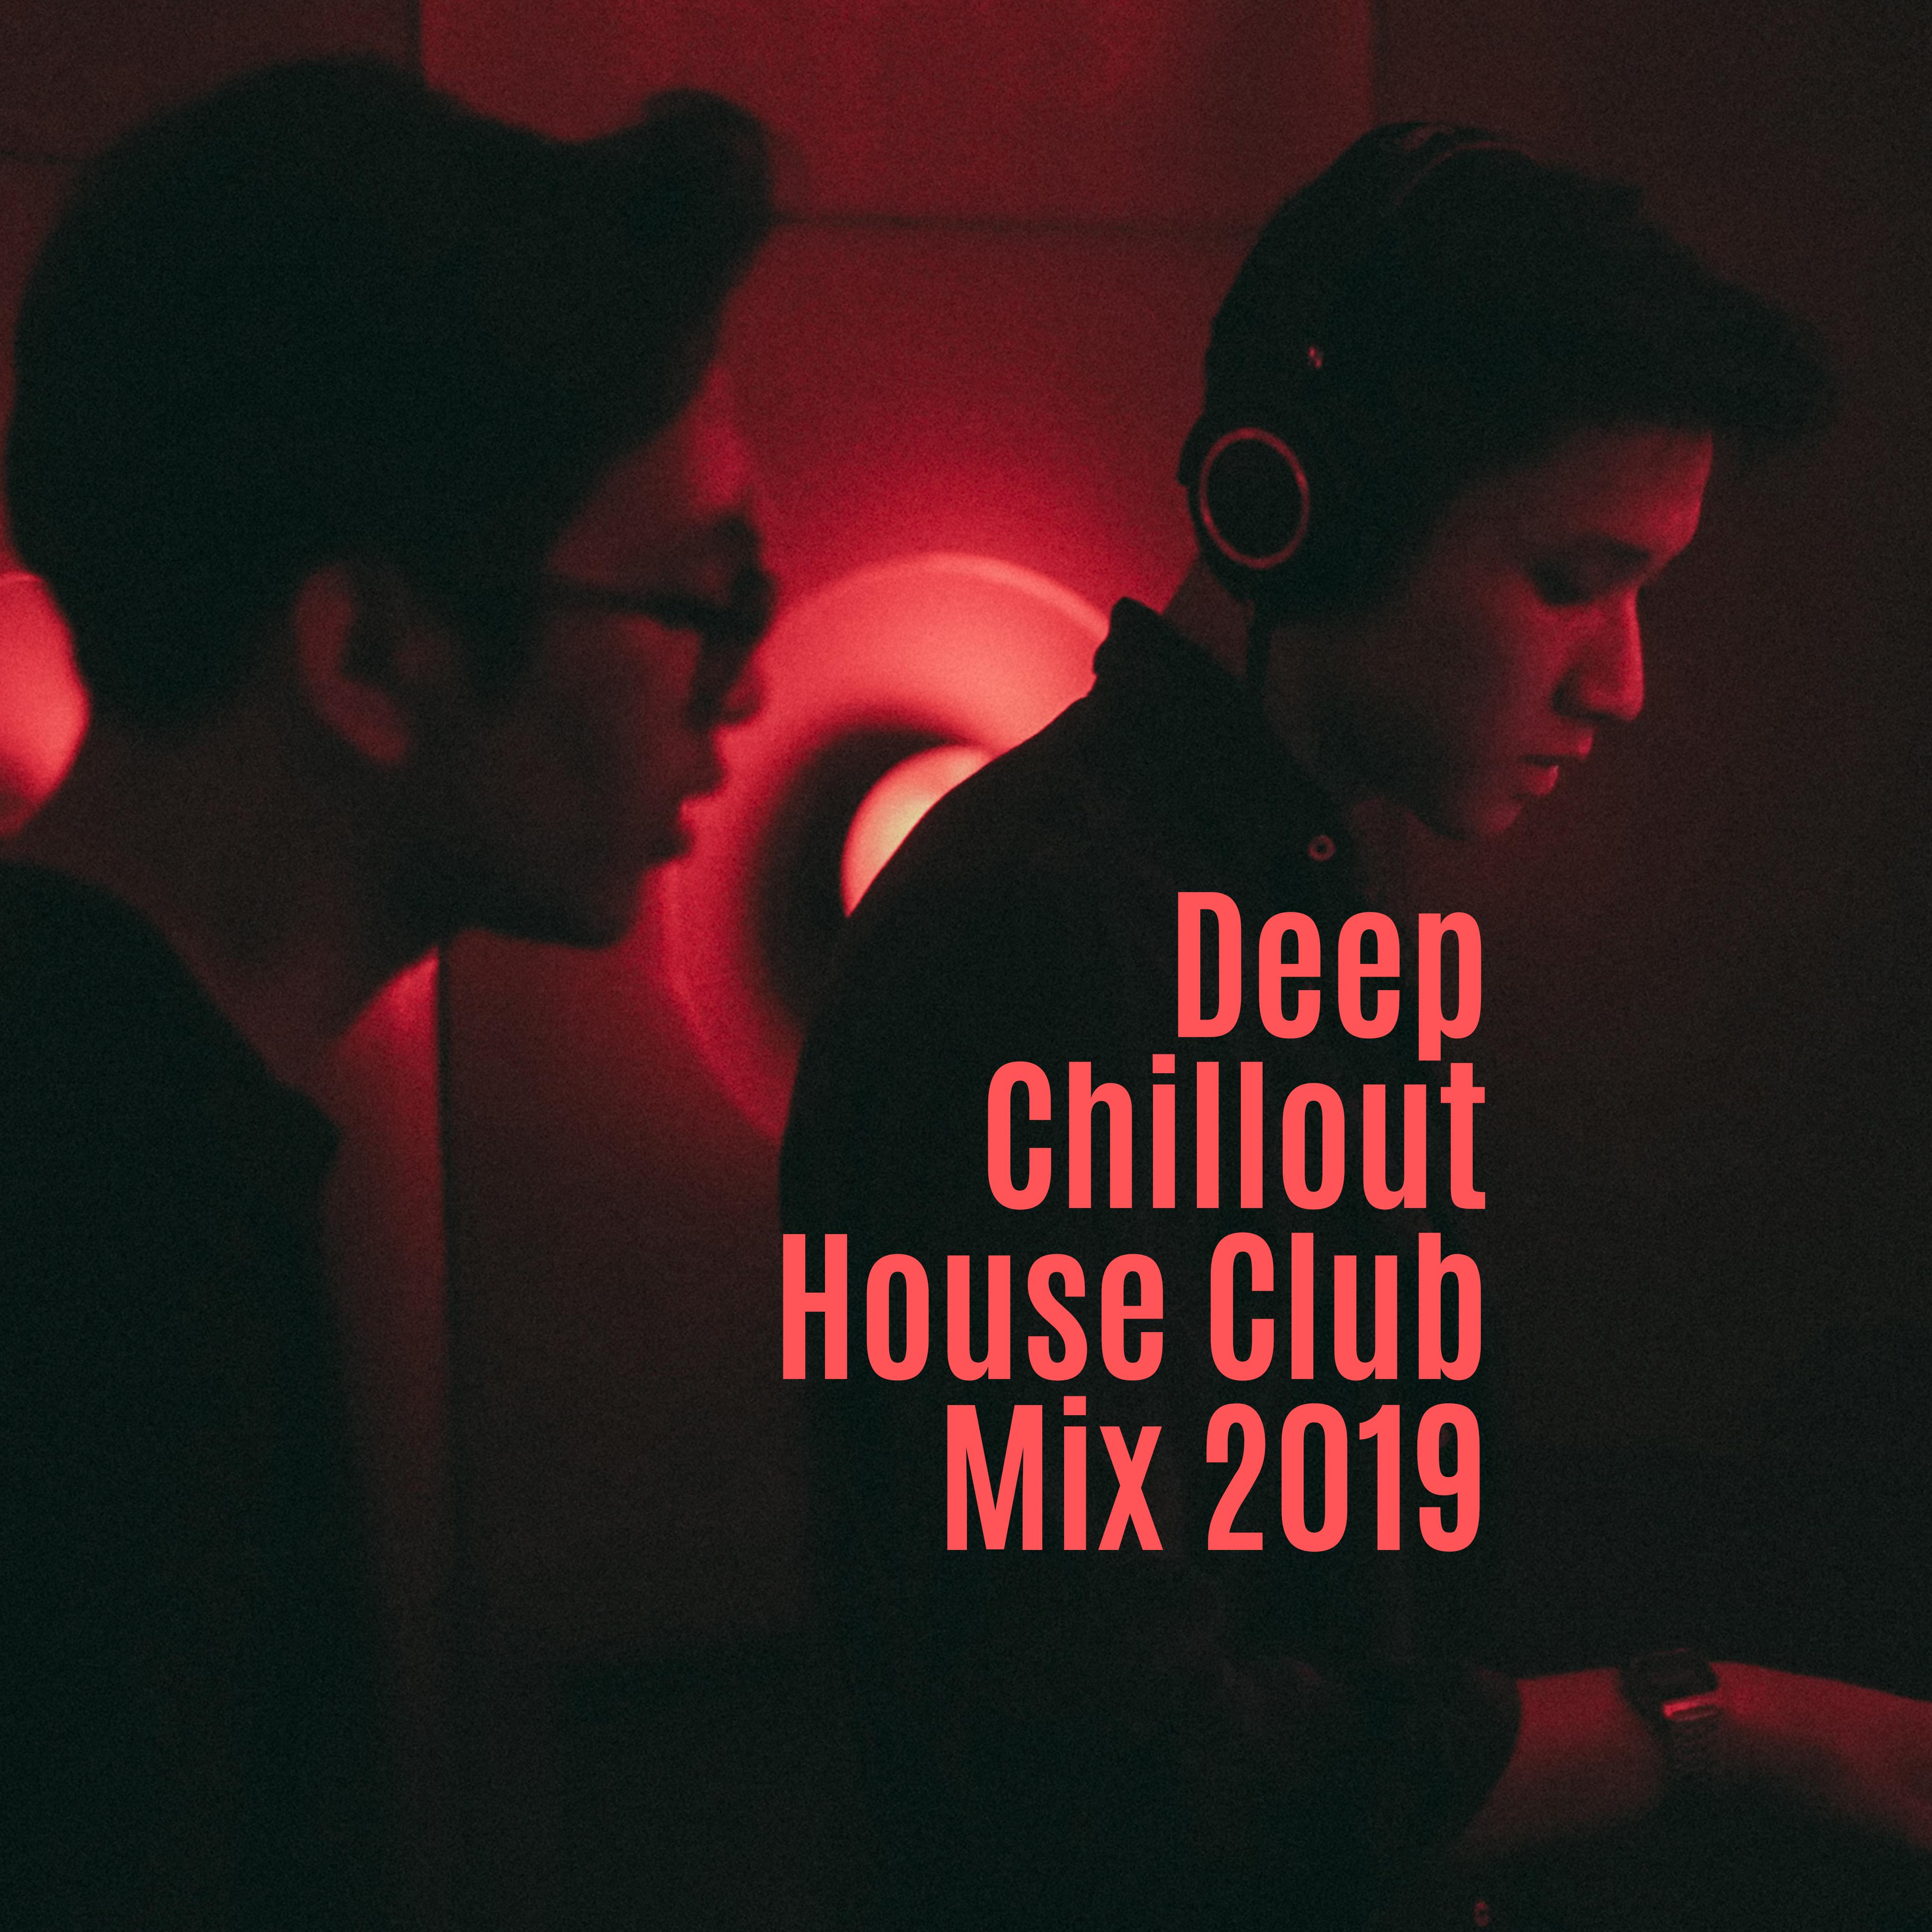 Deep Chillout House Club Mix 2019